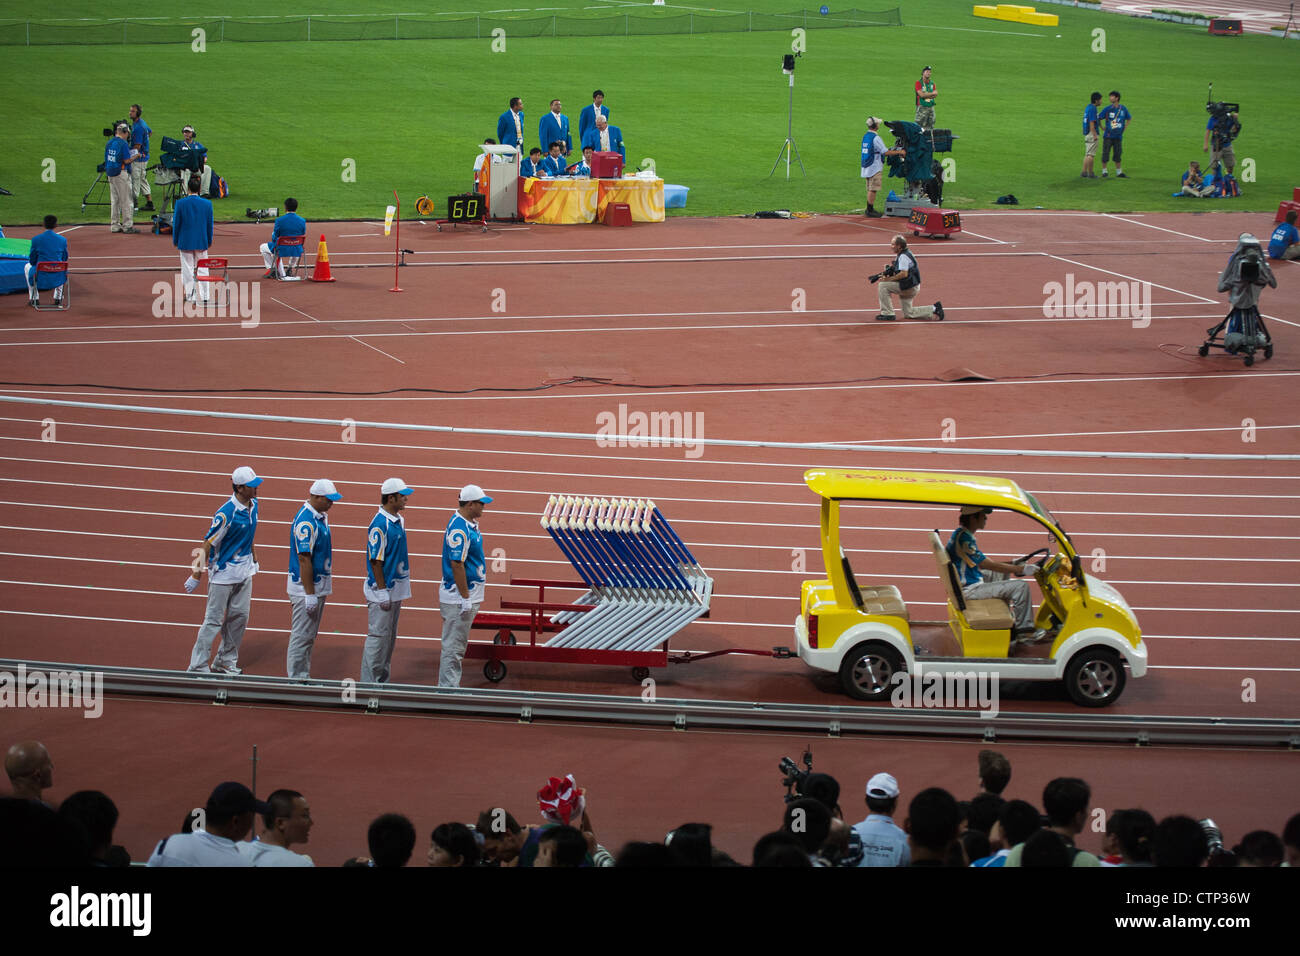 BEIJING, CHINA - AUGUST 16, 2008: Field crew sets up hurdles for track and field events in Birds Nest Stadium 2008 Summer Games Stock Photo